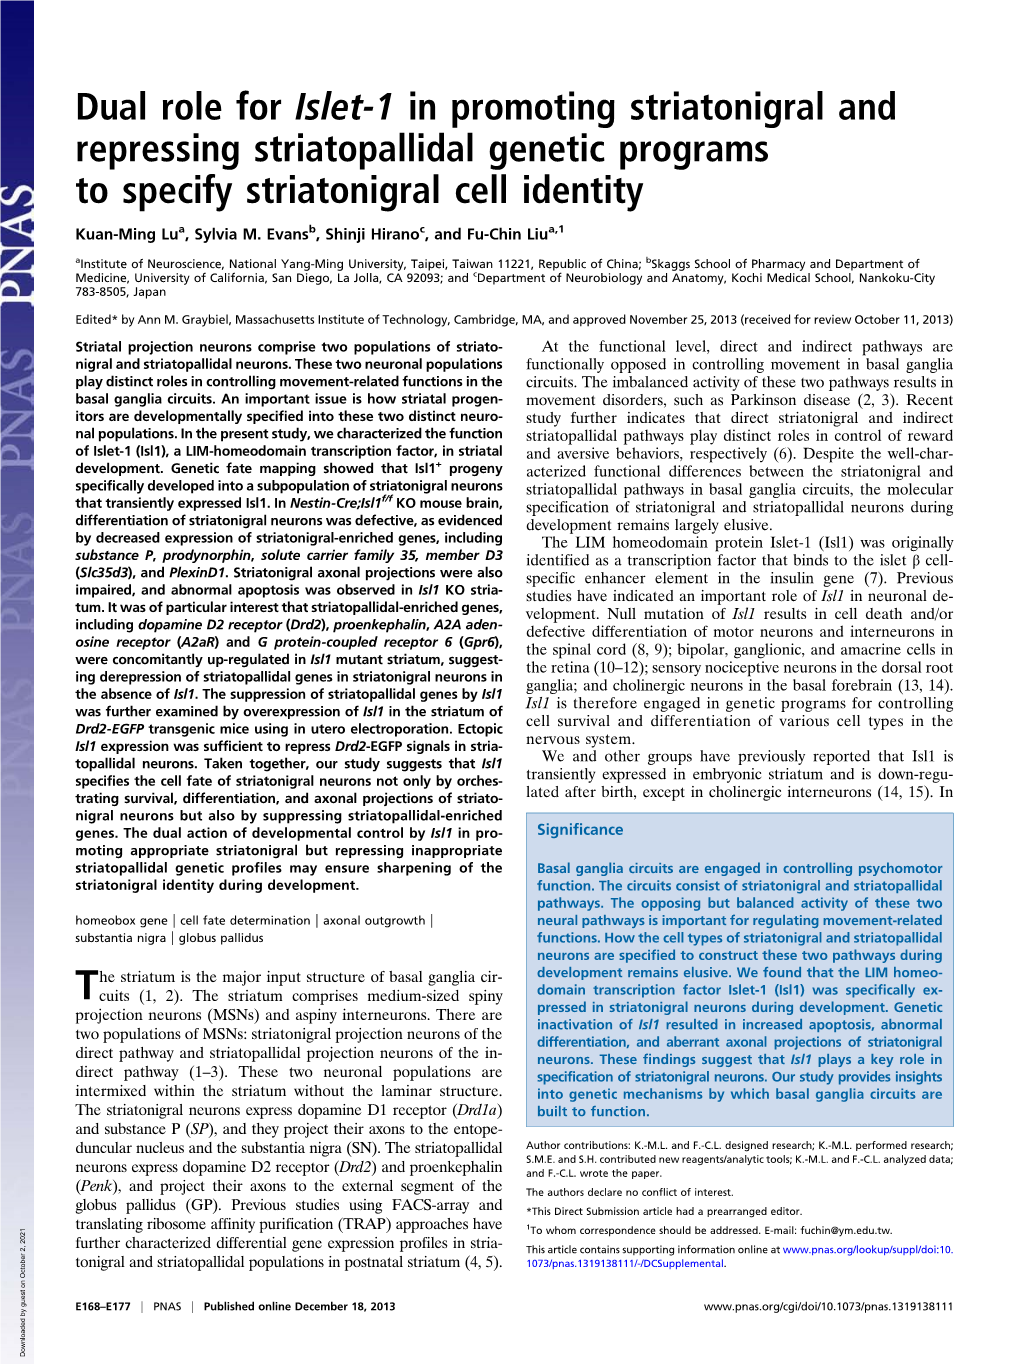 Dual Role for Islet-1 in Promoting Striatonigral and Repressing Striatopallidal Genetic Programs to Specify Striatonigral Cell Identity